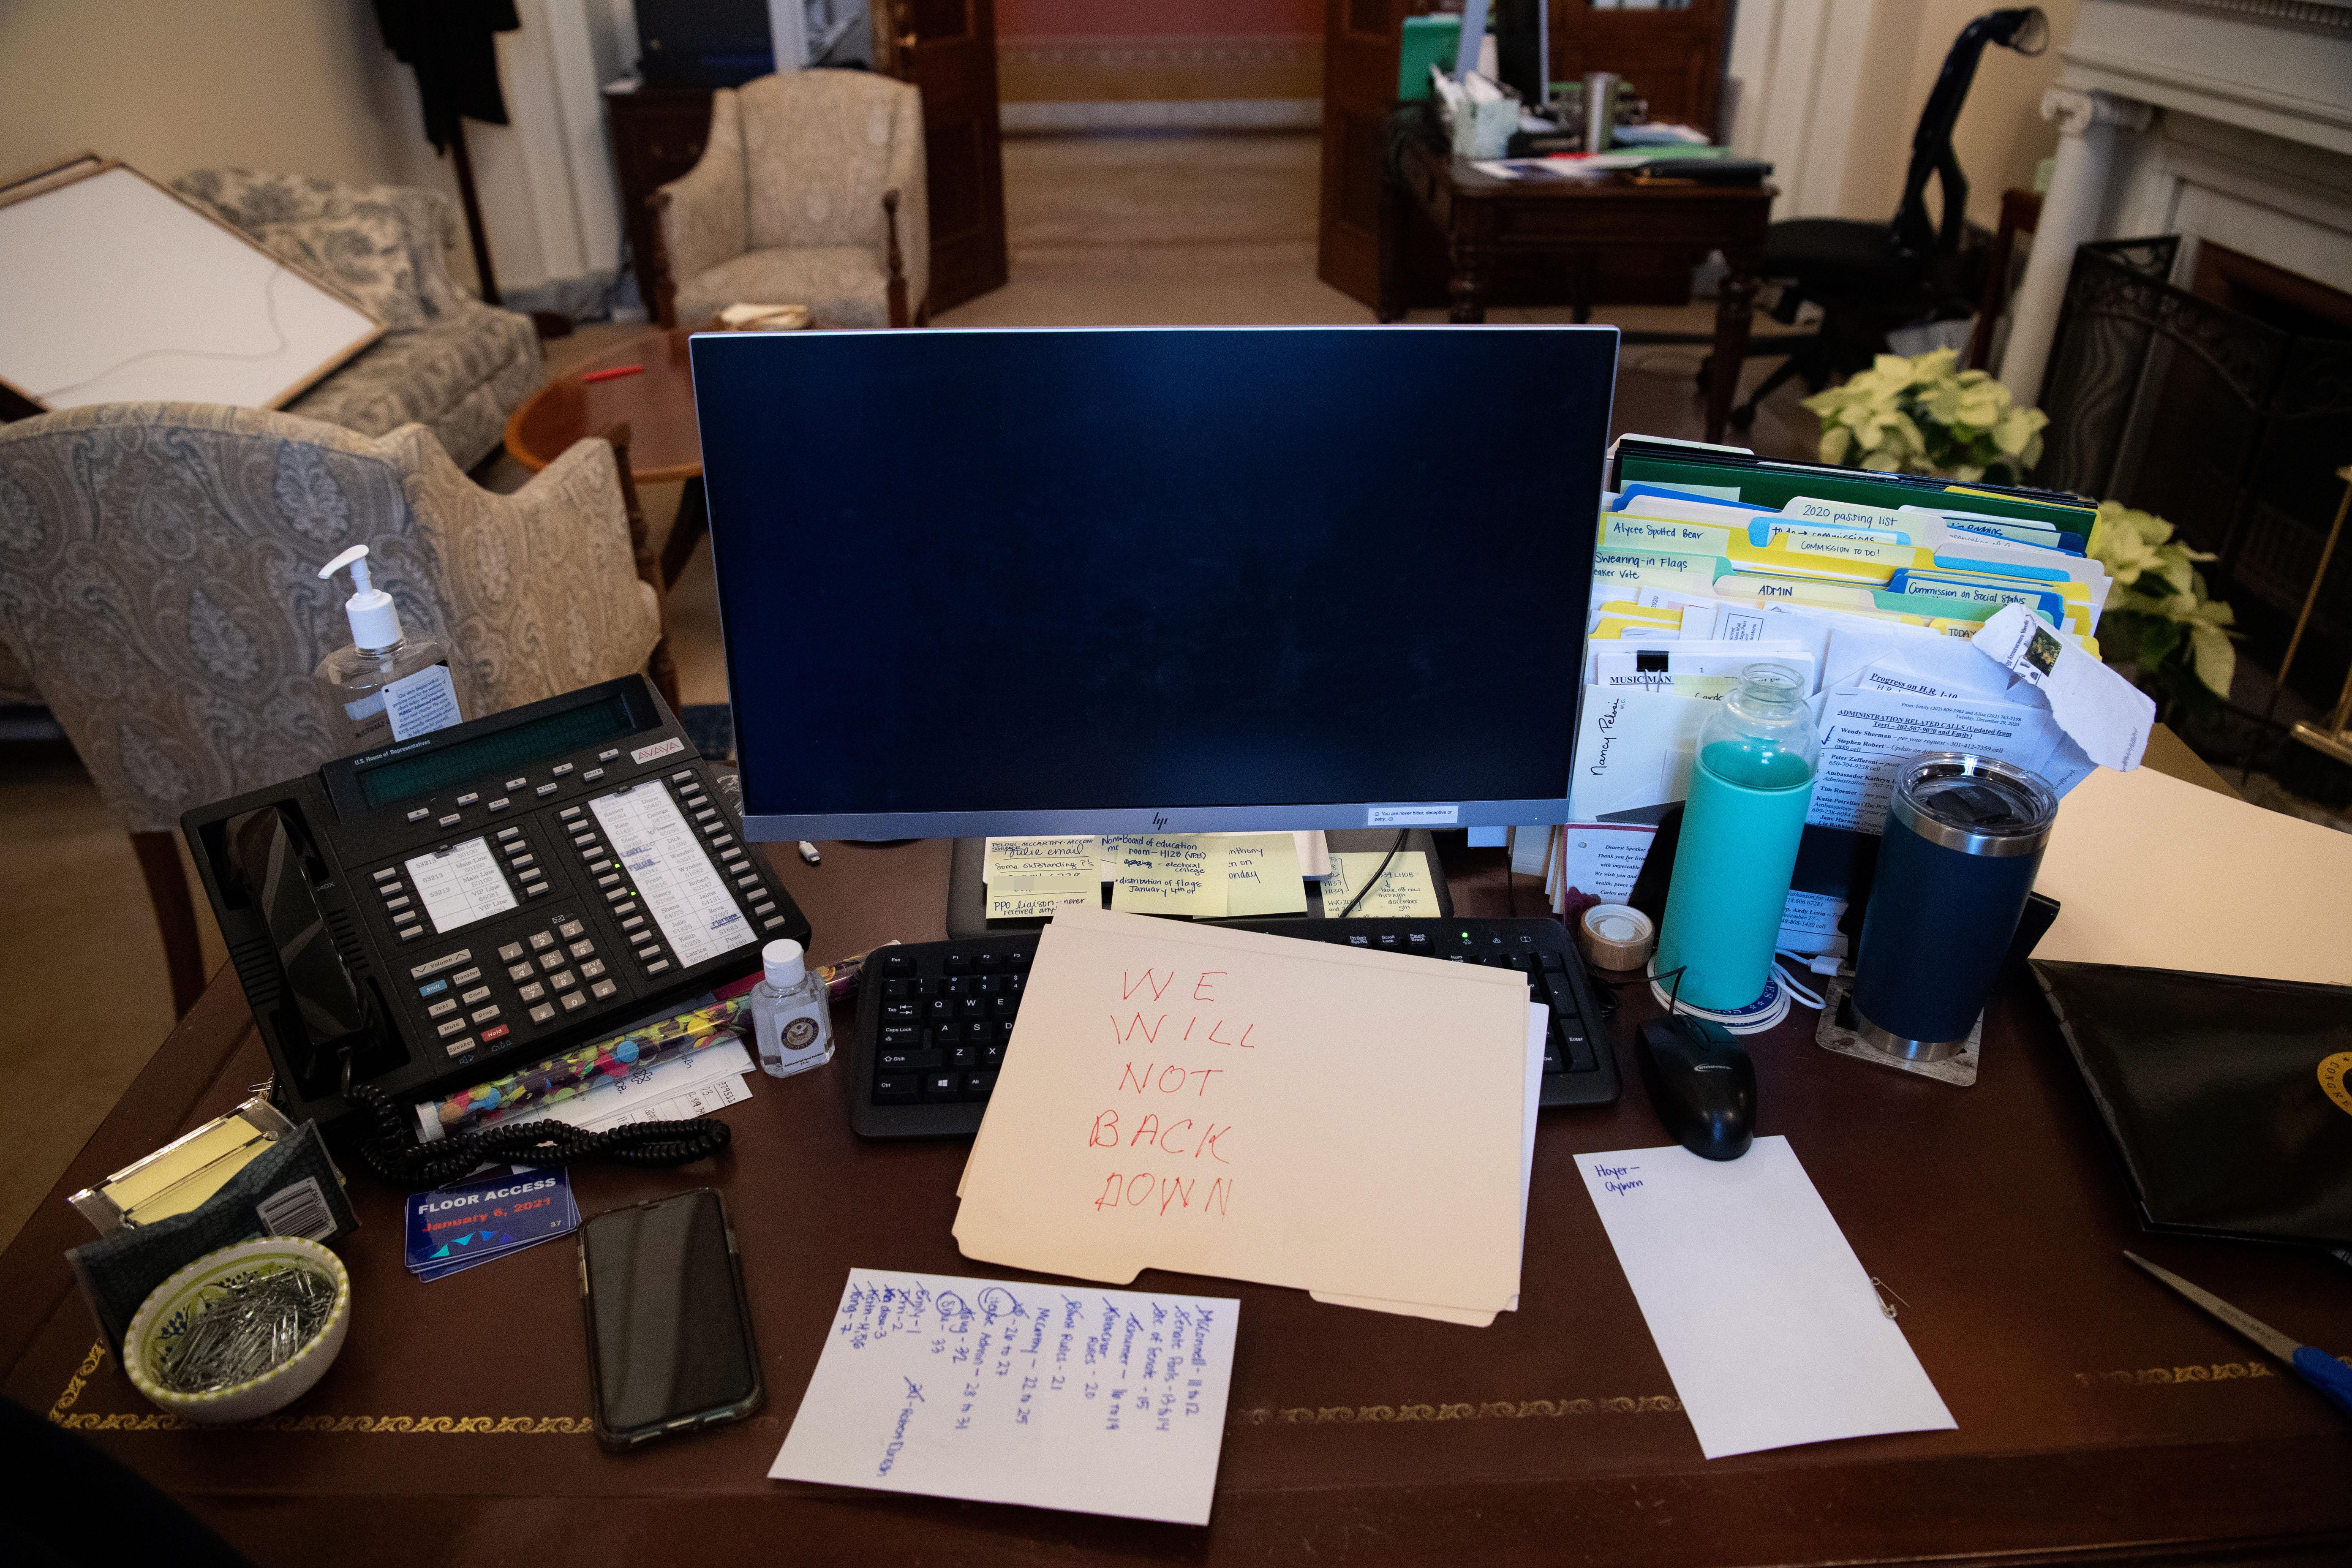 A desk in Pelosi's office with papers, a phone, and a computer on it. A manila folder with "WE WILL NOT BACK DOWN" written on it in red has been placed over the keyboard.